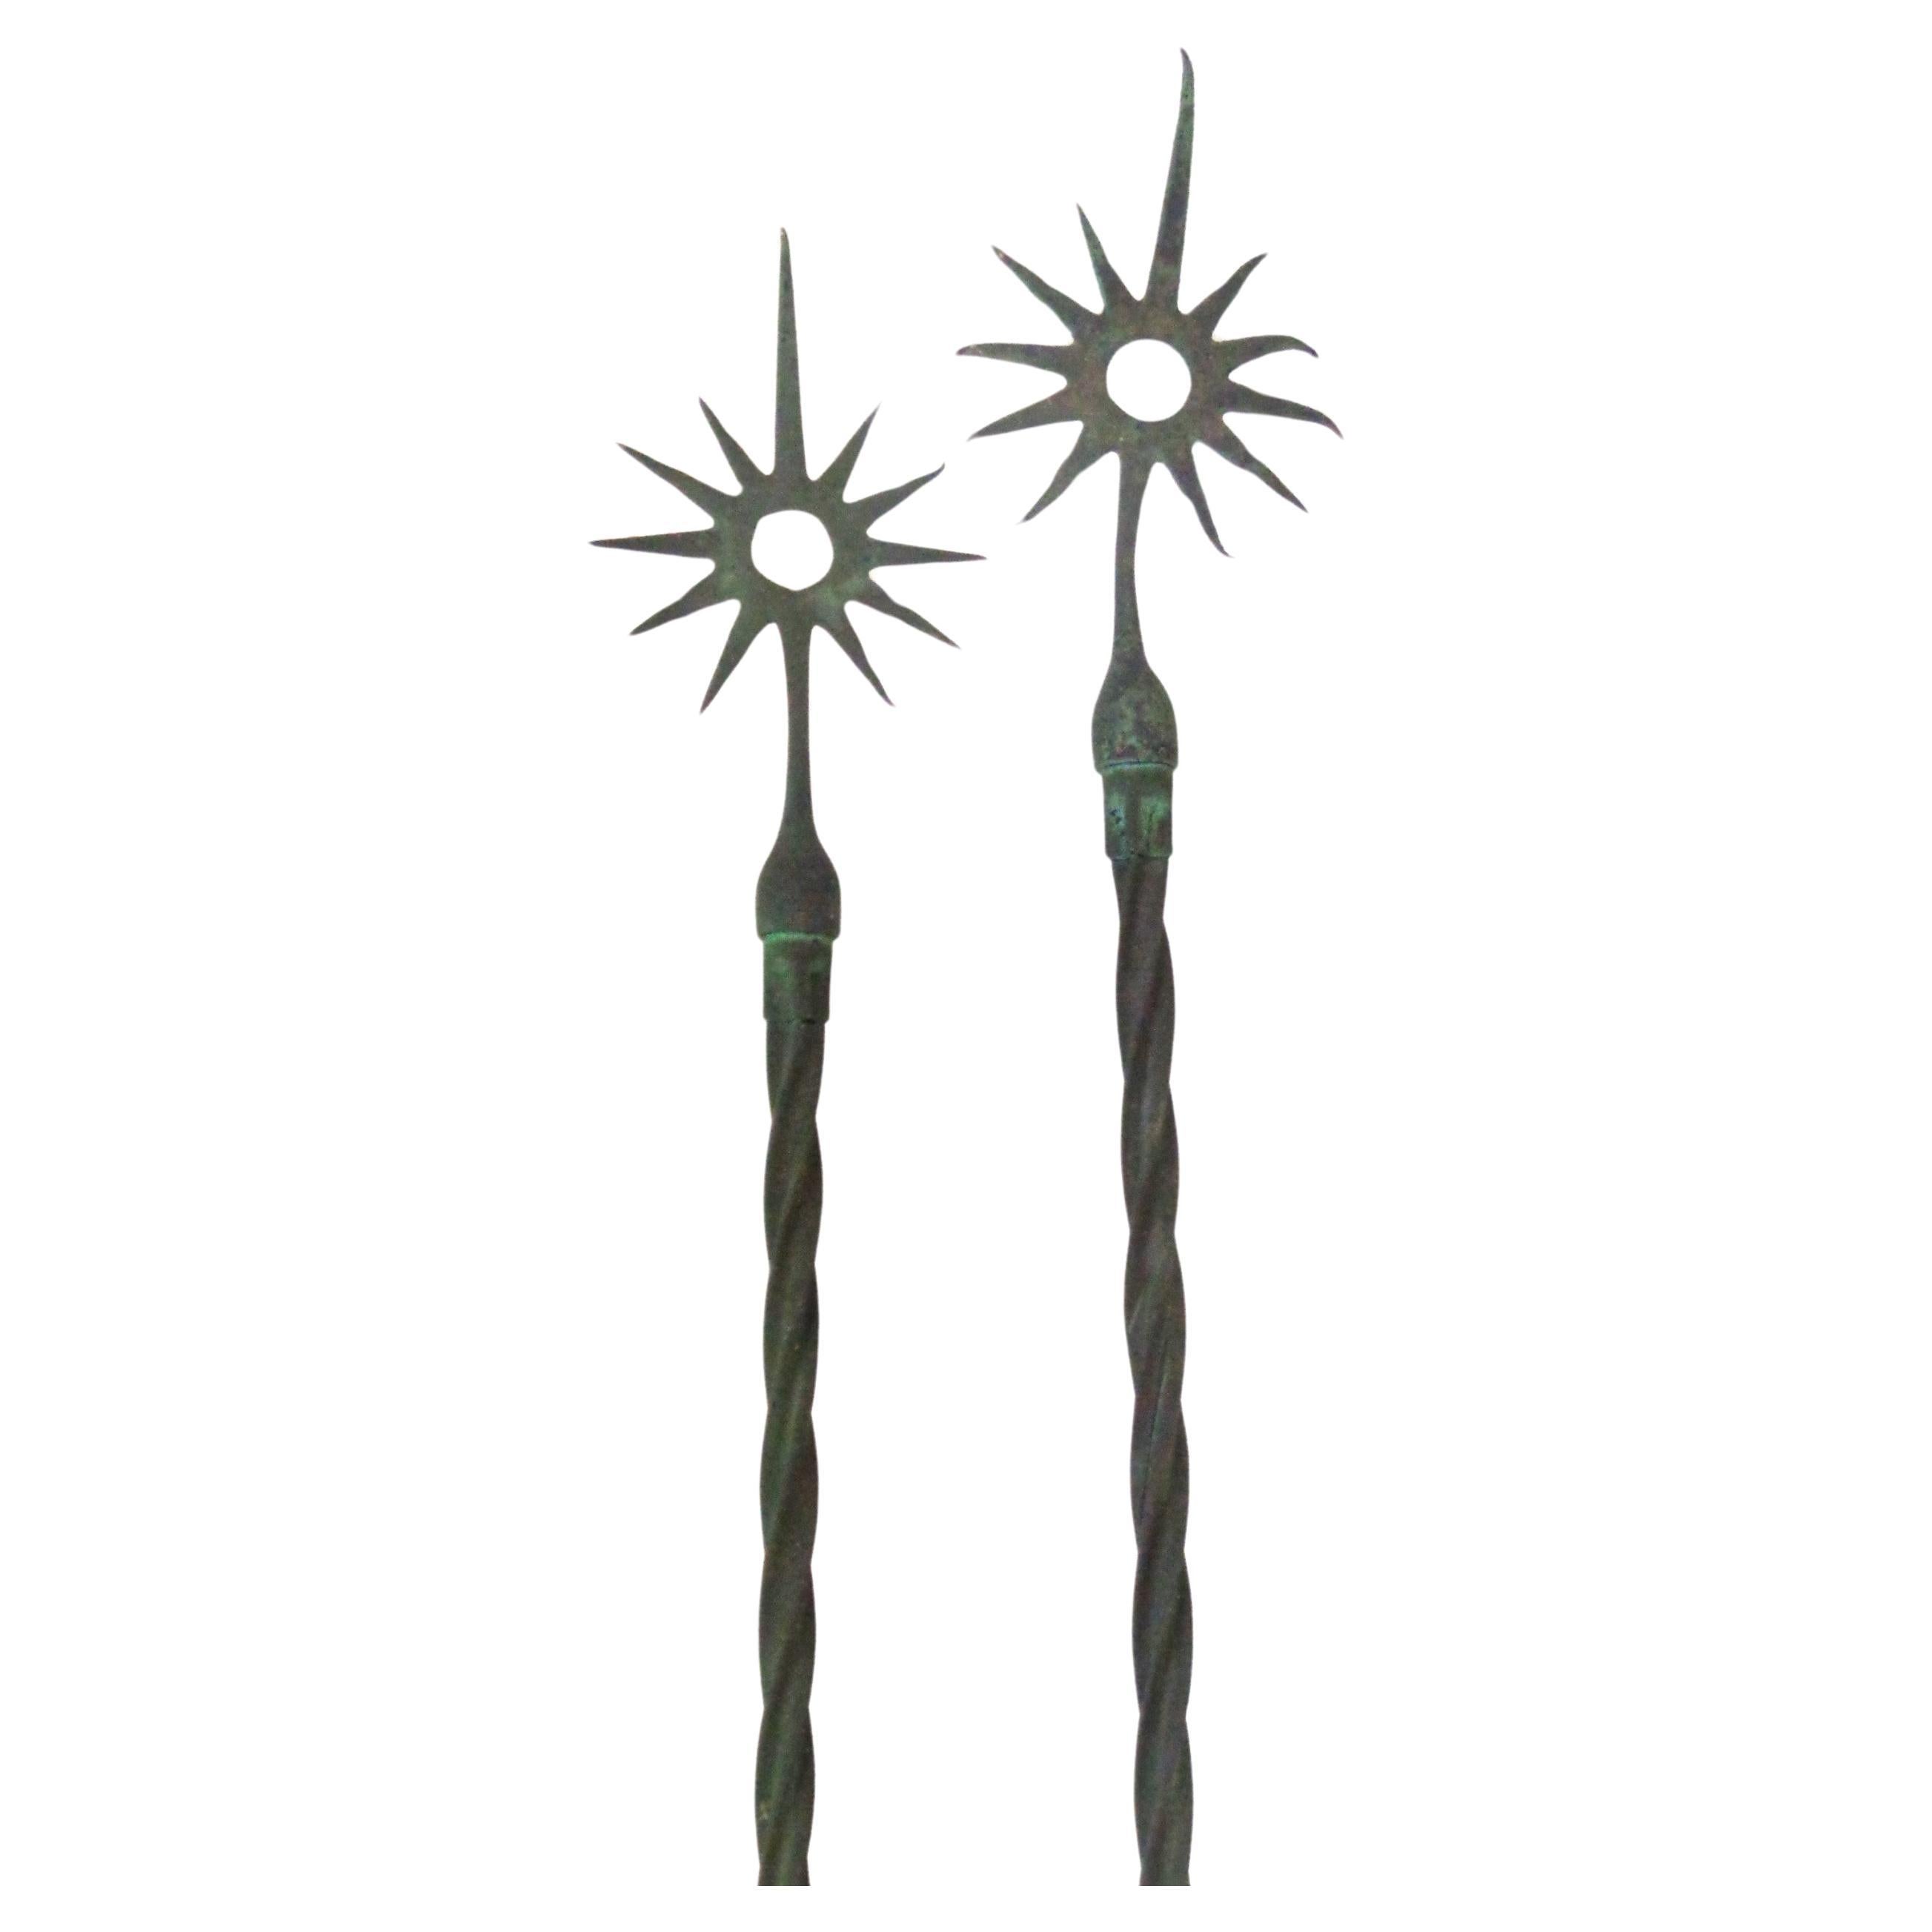 Pair of antique American lightning rods with twisted copper skinned wrought iron shafts / iron tripod stands / eleven point sunburst copper tops. Both lighting rods in original as found antique condition w/ beautiful naturally aged verdigris patina.